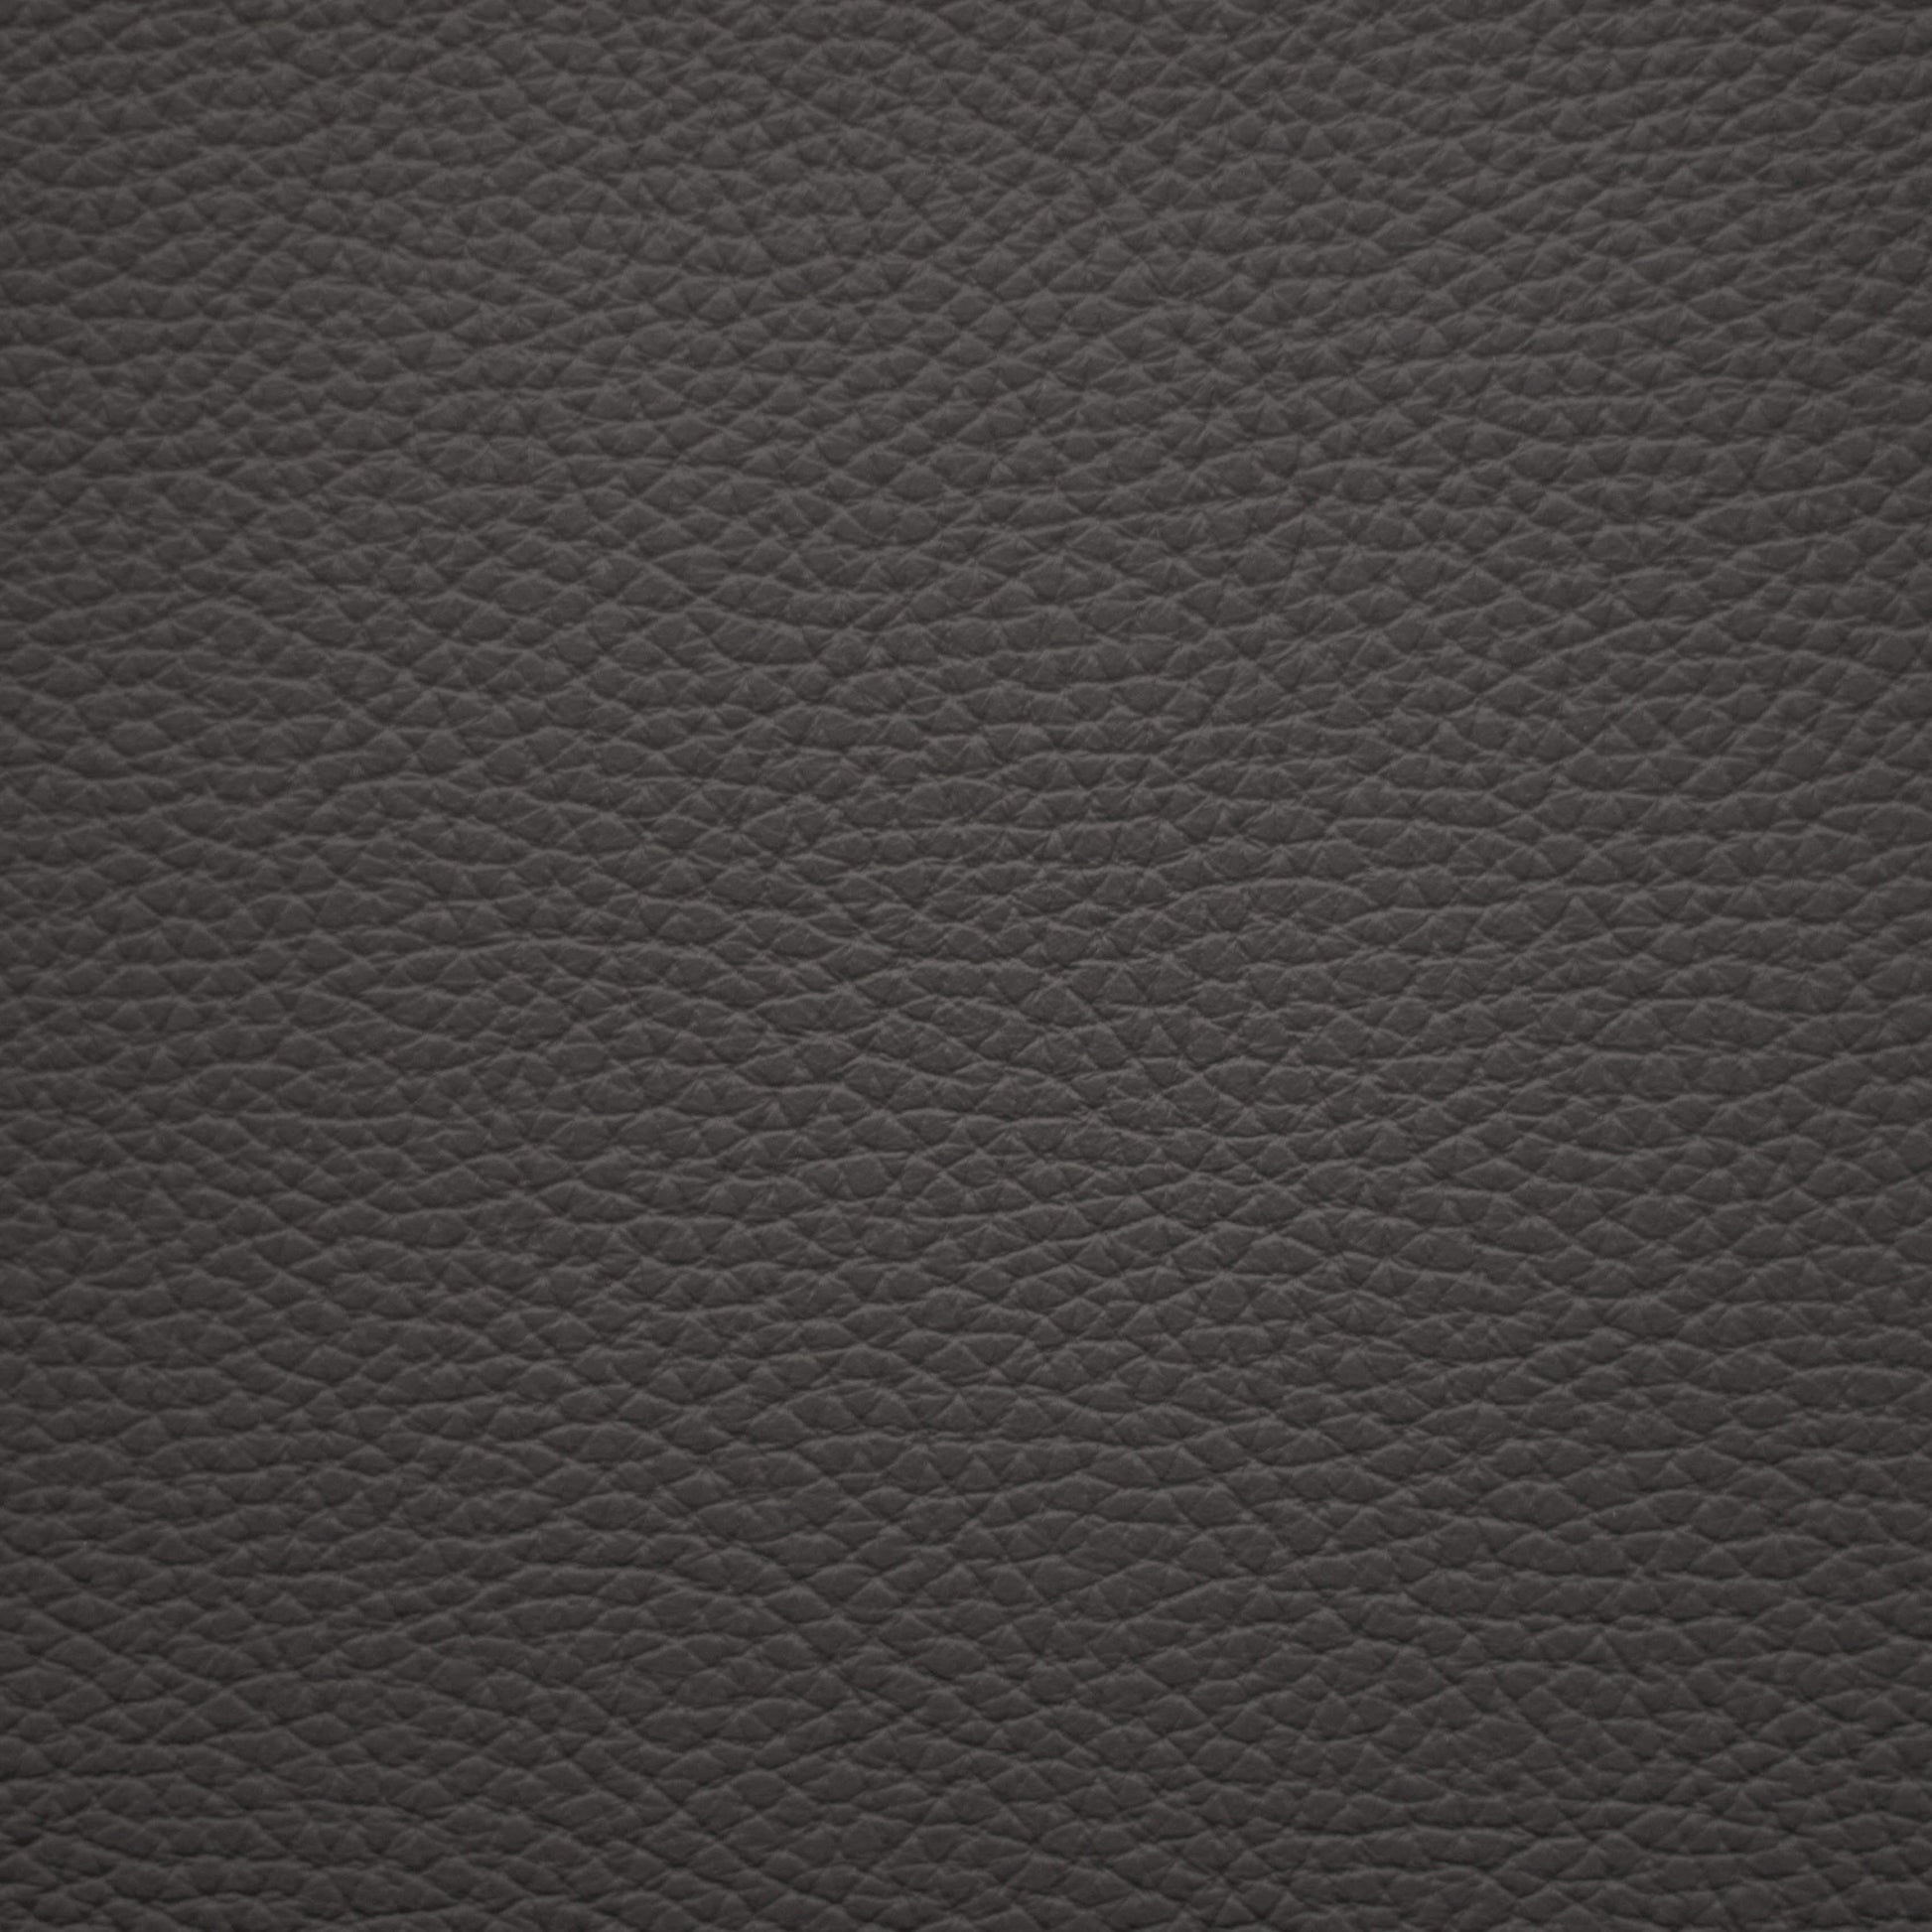 Mystique, Thunderbolt, Iconic® Antimicrobial & Cleanable, Hospitality Leather Hide